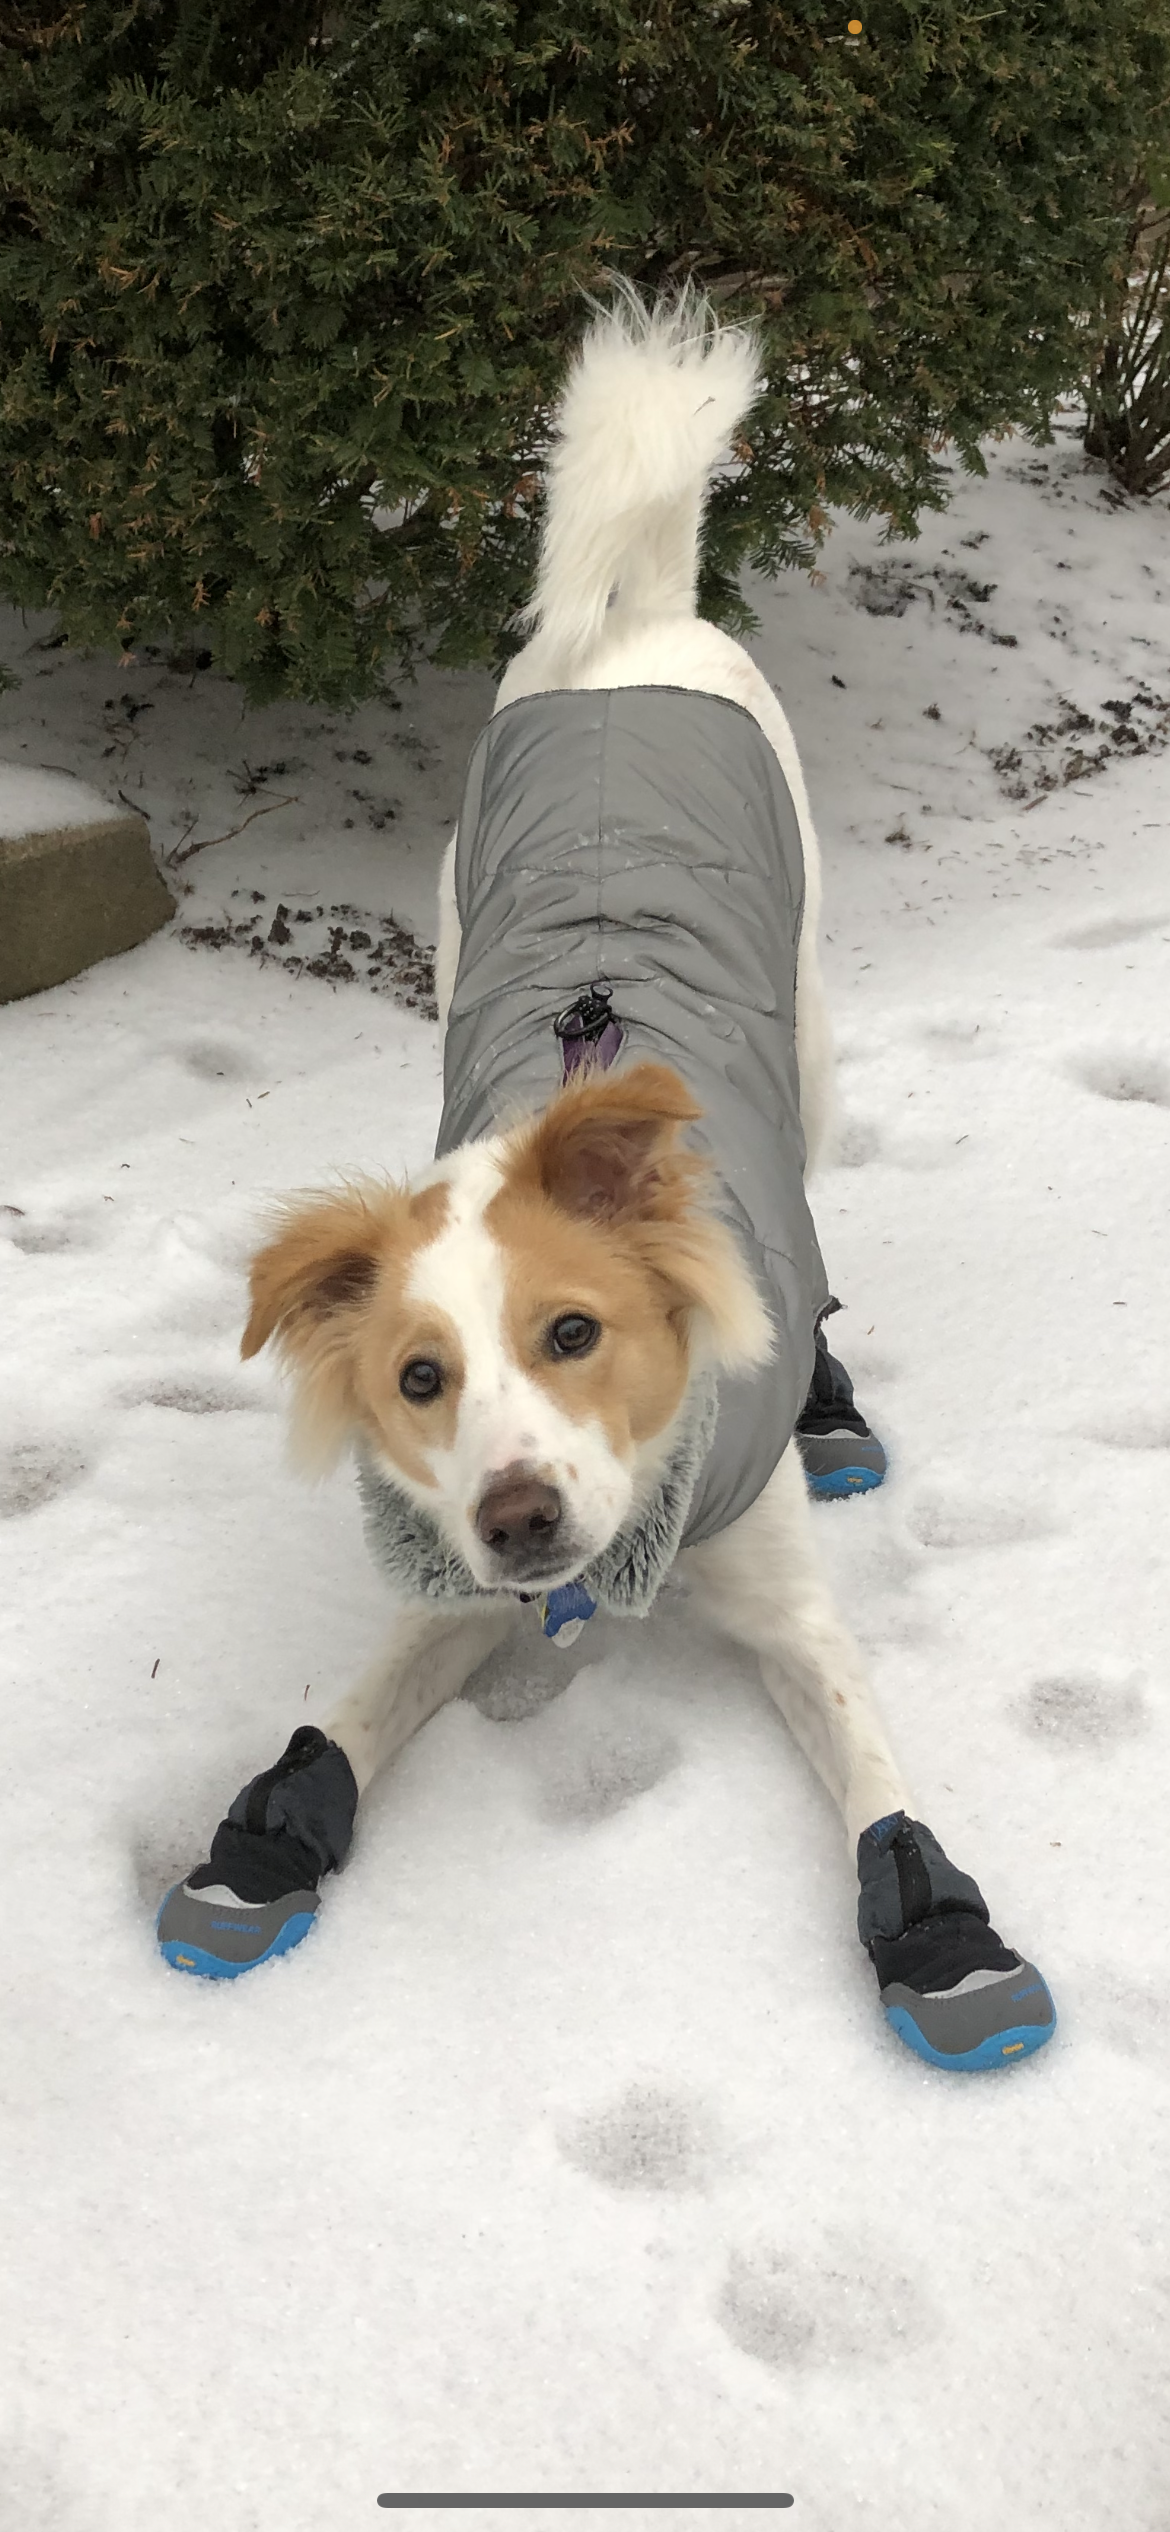 Tan and white dog in coat and booties play bowing in the snow